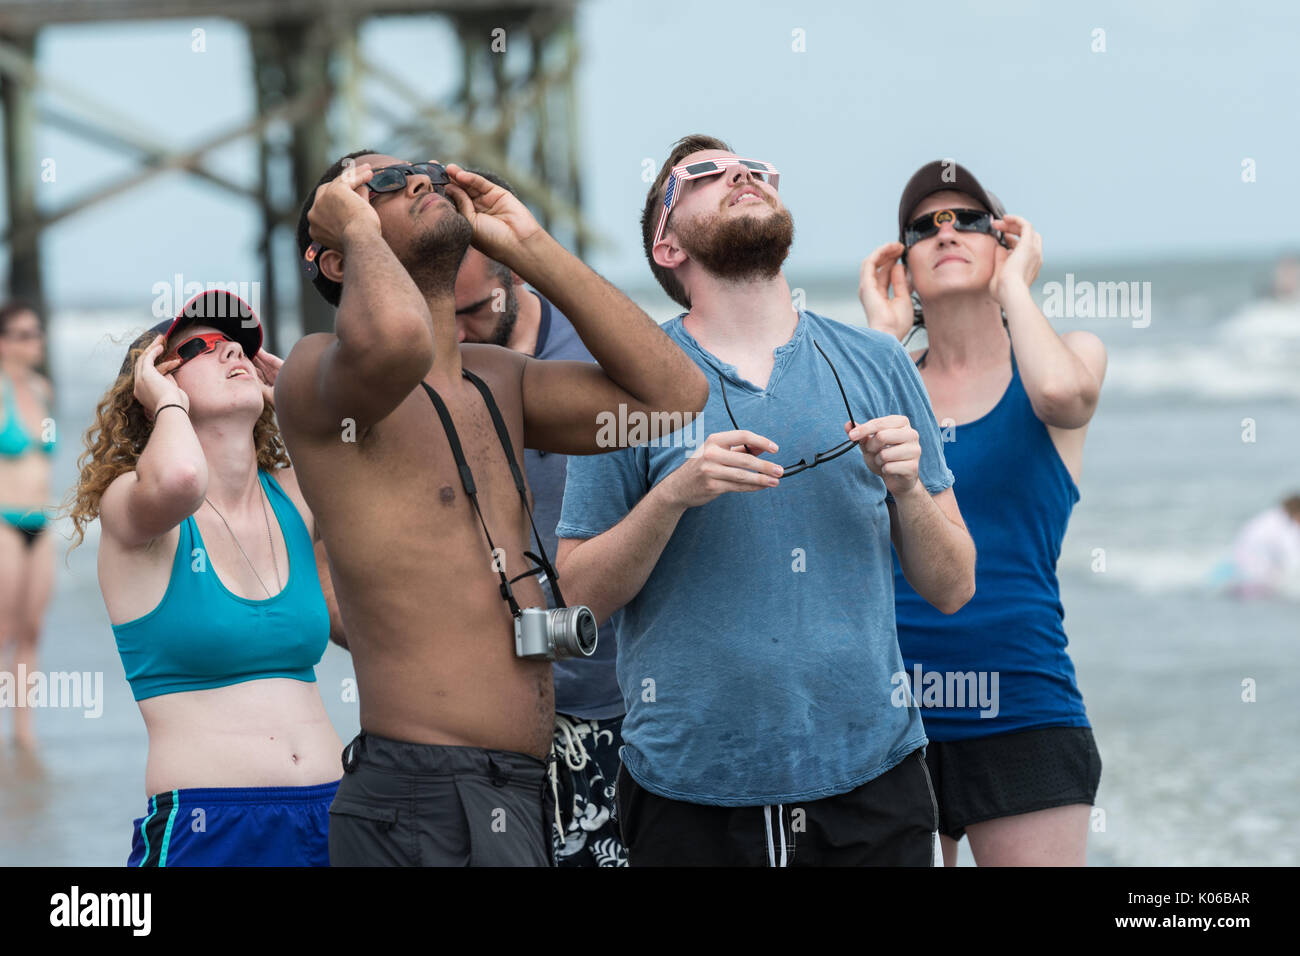 Charleston, Isle of Palms, USA. 21st Aug, 2017. A group of people view the total solar eclipse as it passes over the beach outside Charleston August 21, 2017 in Isle of Palms, South Carolina. The solar eclipse after sweeping across the nation crosses the Charleston area before heading over the Atlantic Ocean. Credit: Planetpix/Alamy Live News Stock Photo